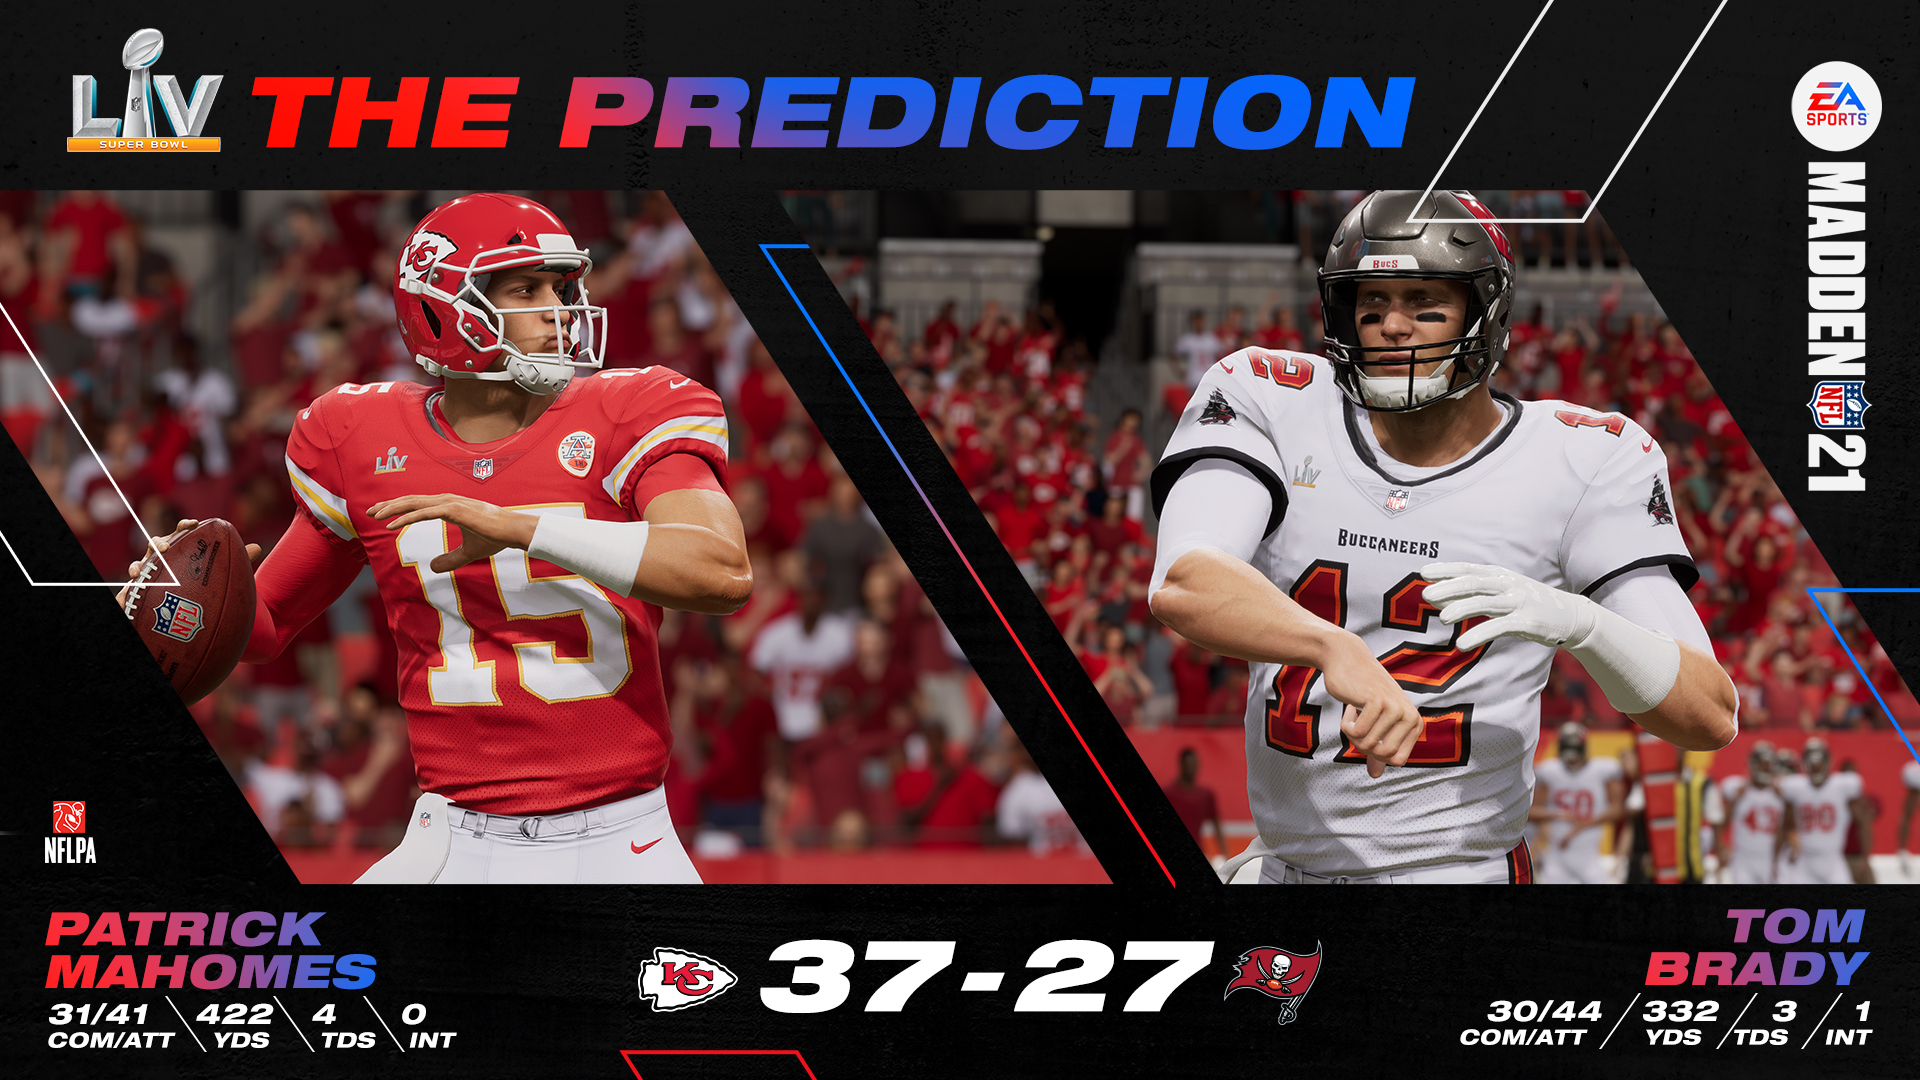 EA SPORTS Madden NFL Predicts Kansas City To Be Back To Back Champions With Super Bowl LV Win